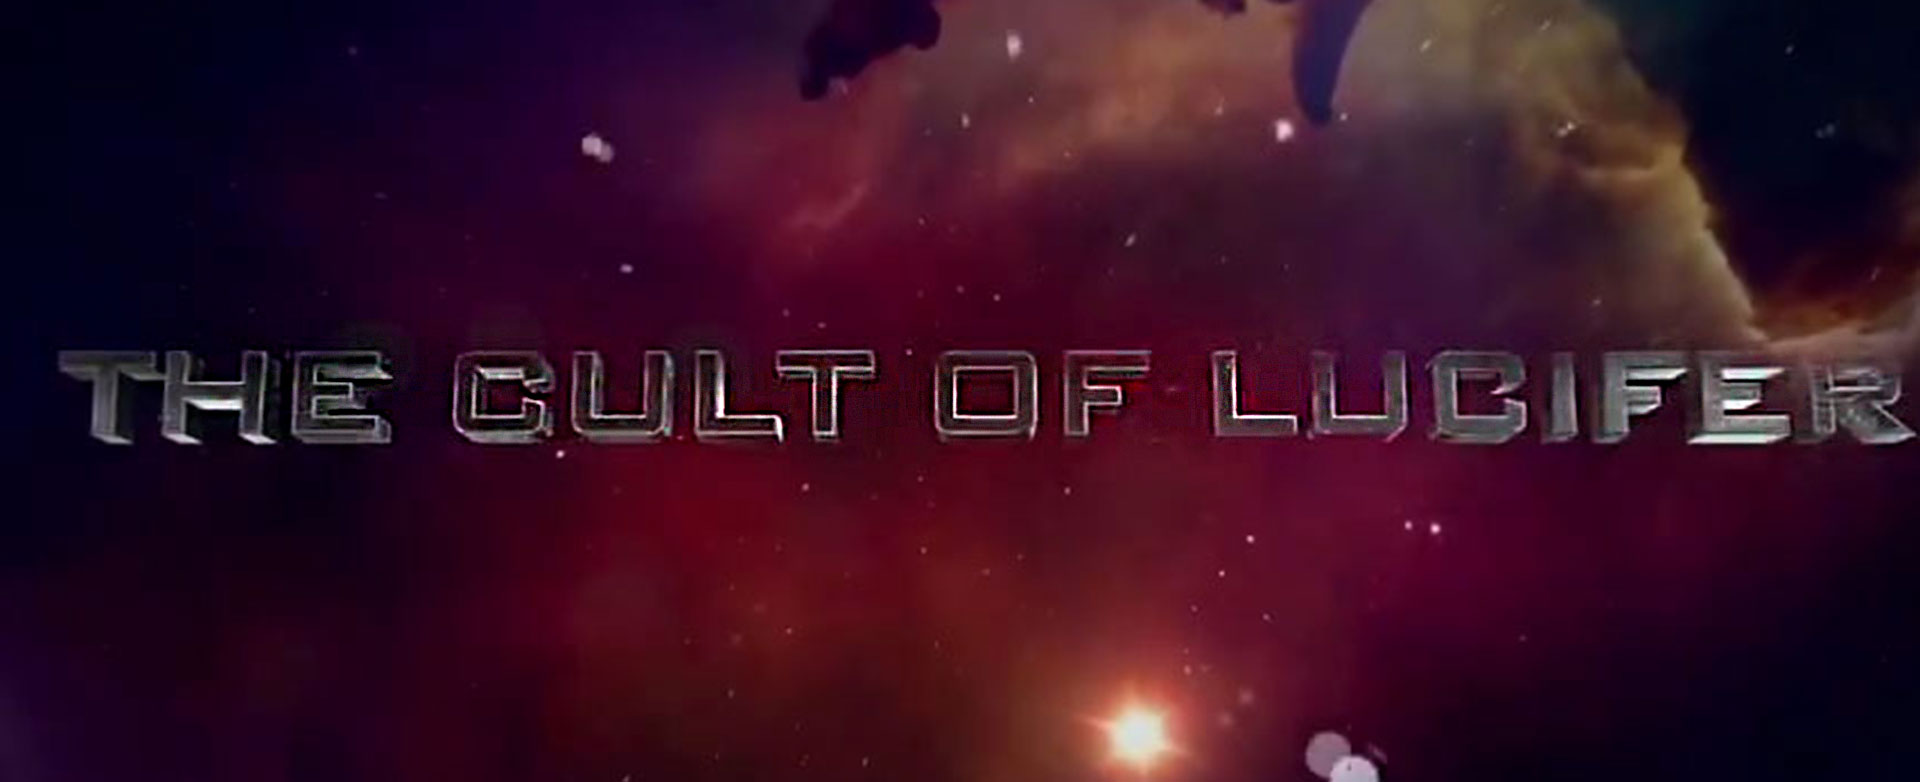 MyPatriotsNetwork-Earth Intelligence Network Movies: #1 The Cult of Lucifer